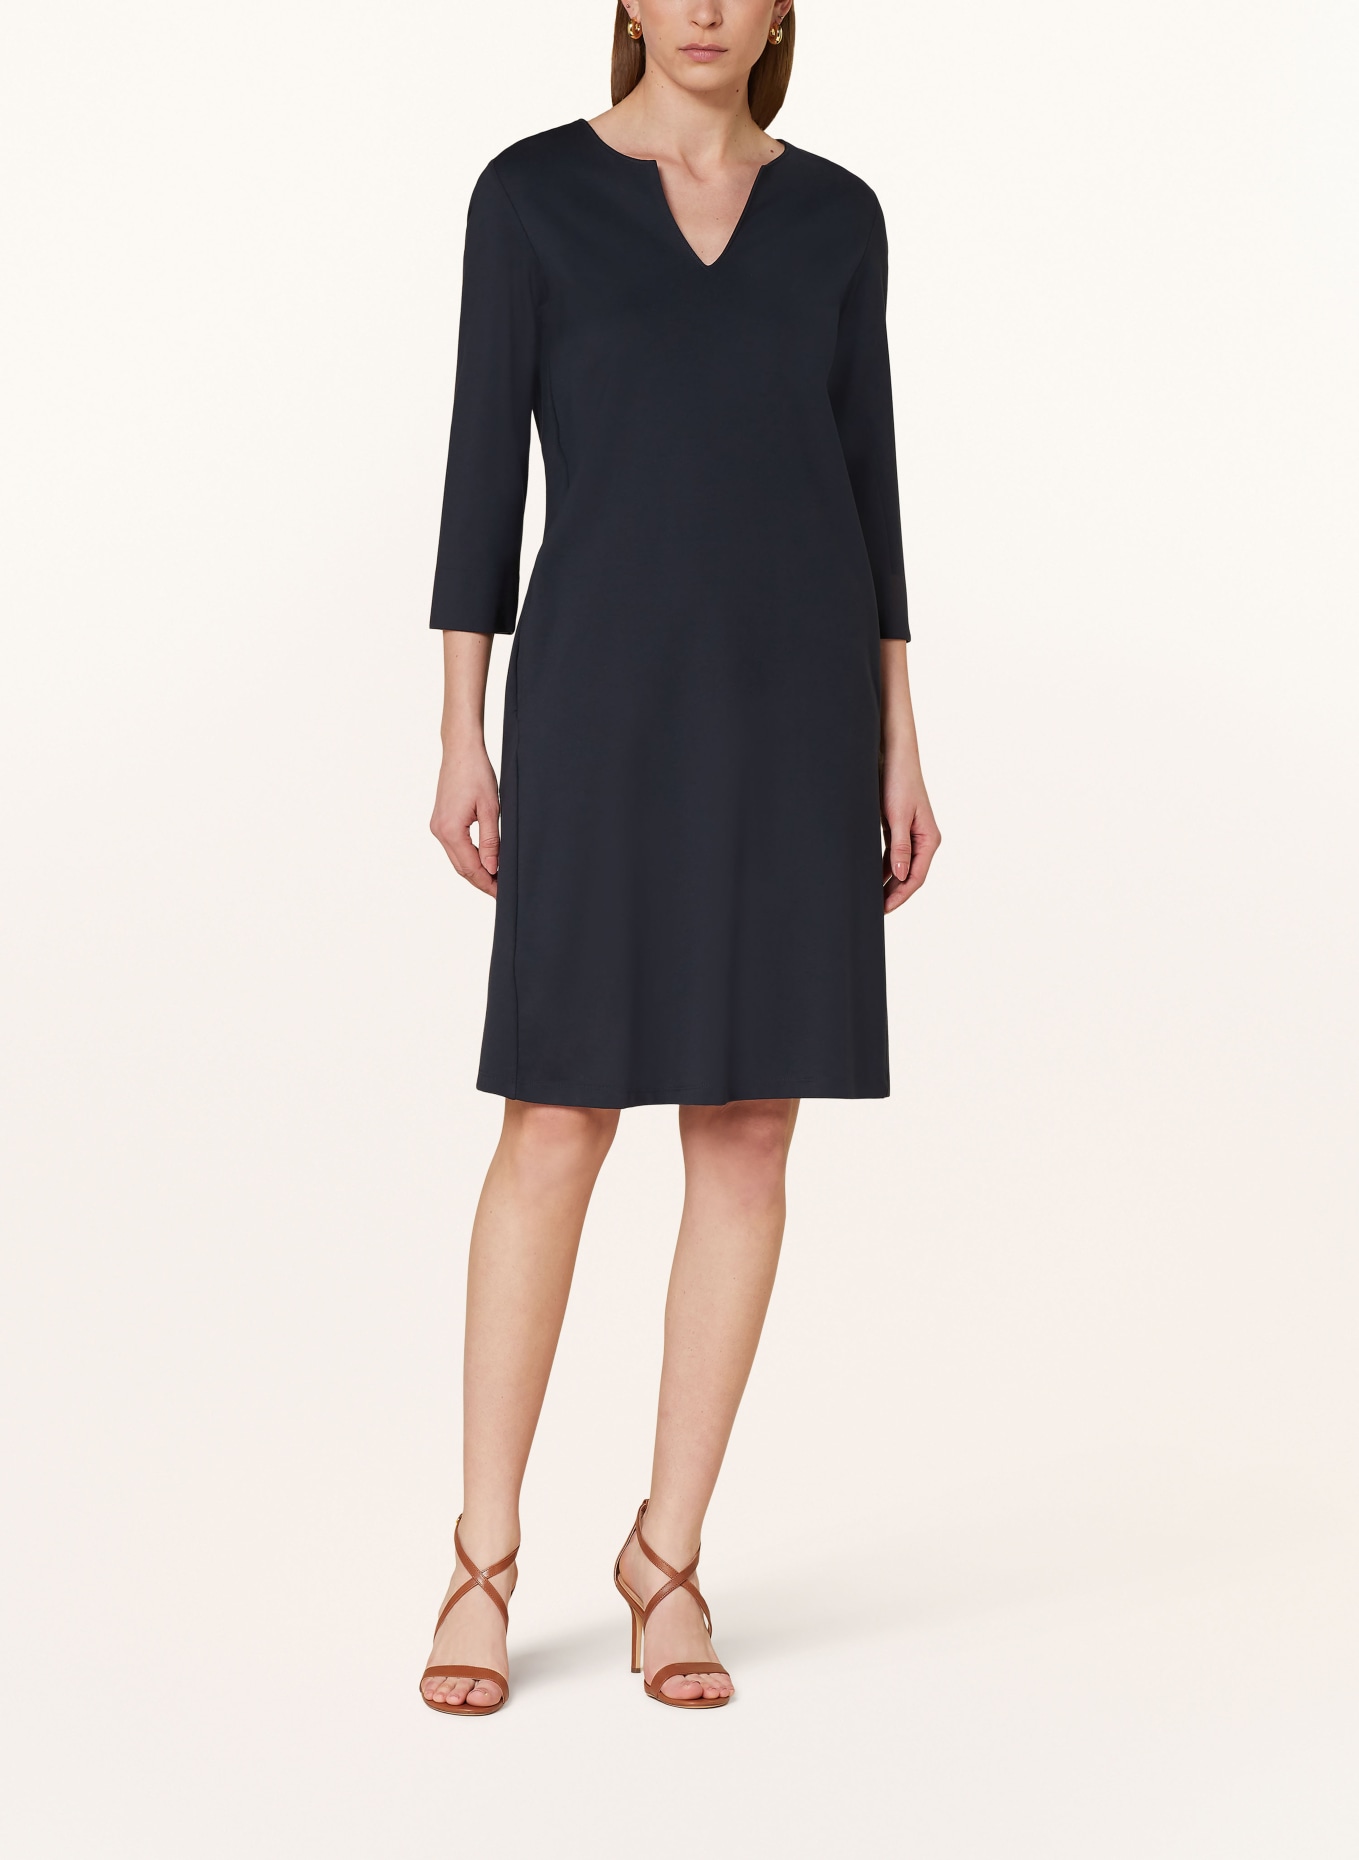 ELENA MIRO Jersey dress with 3/4 sleeves, Color: DARK BLUE (Image 2)